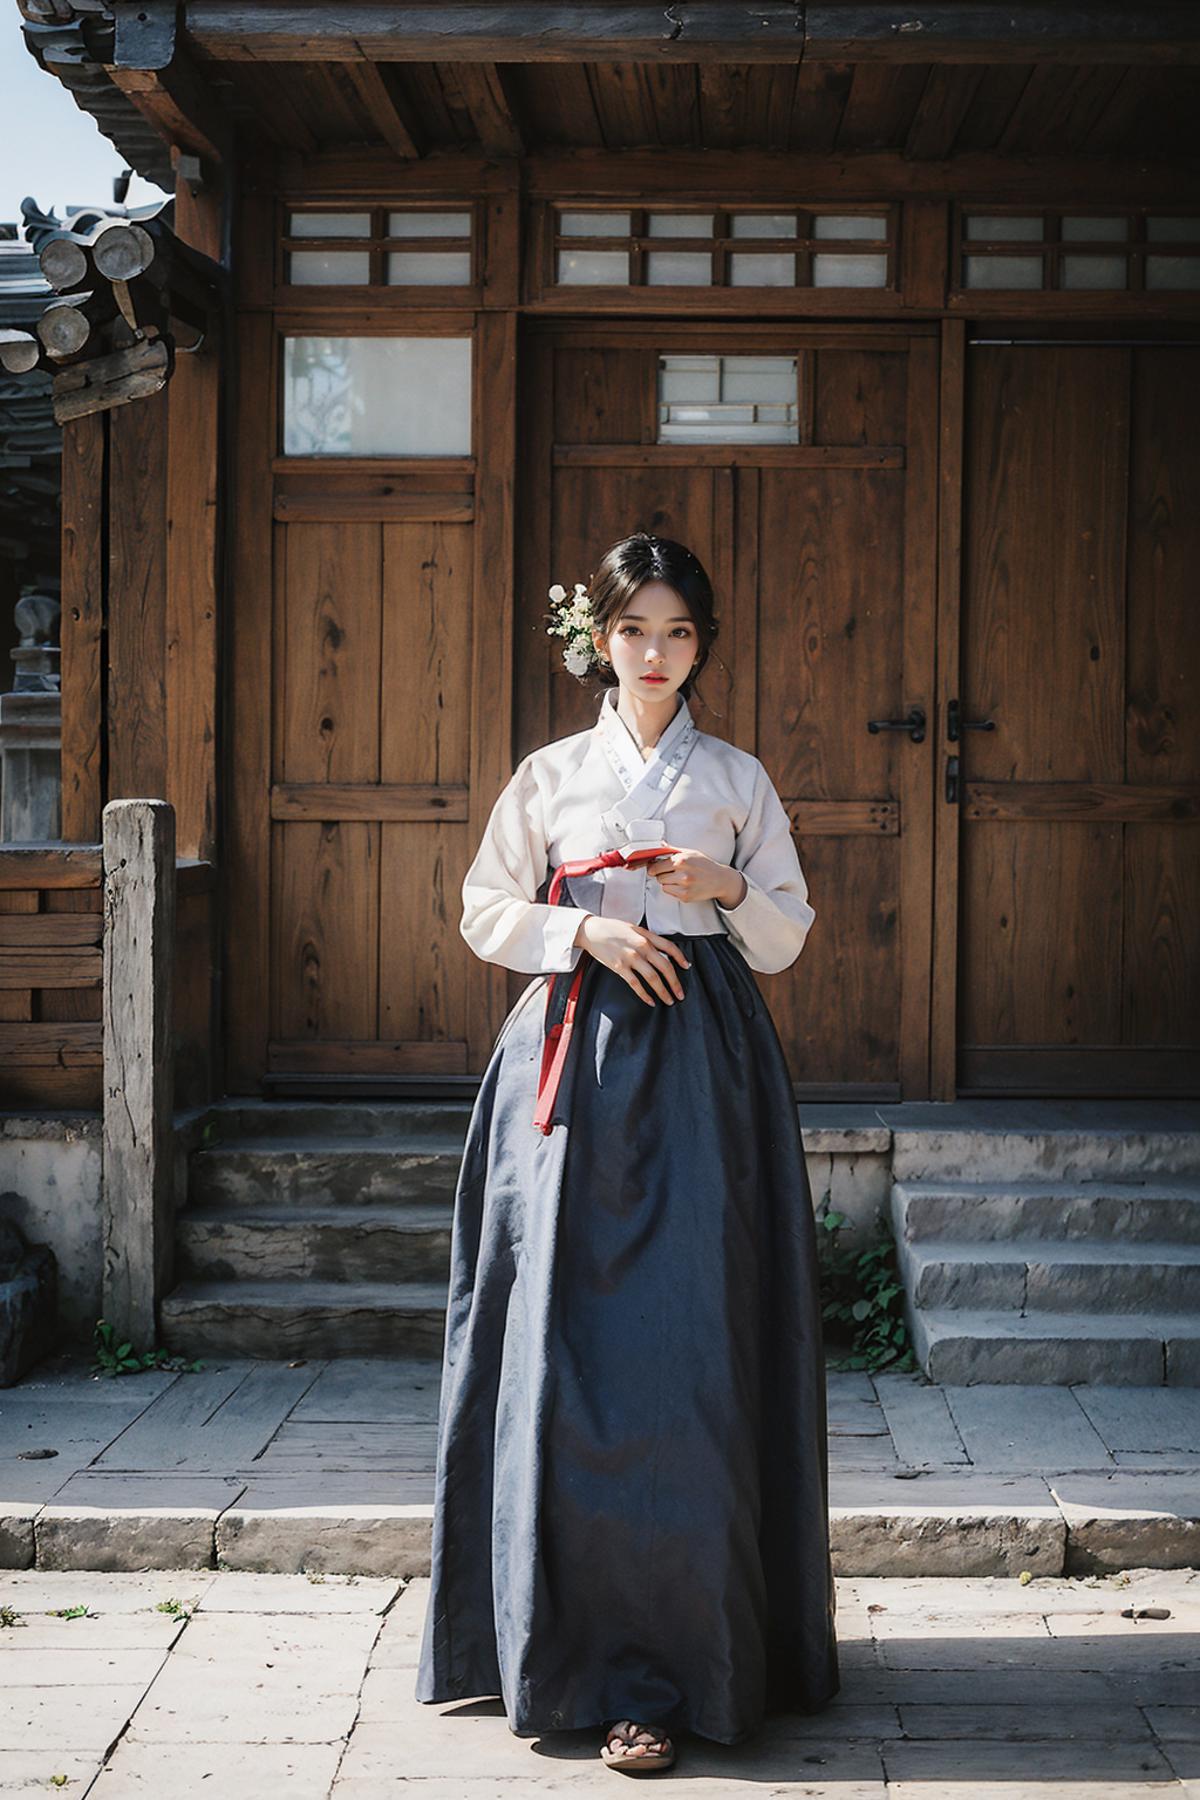 Female Noble Class Hanbok - Korea Clothes image by BWING